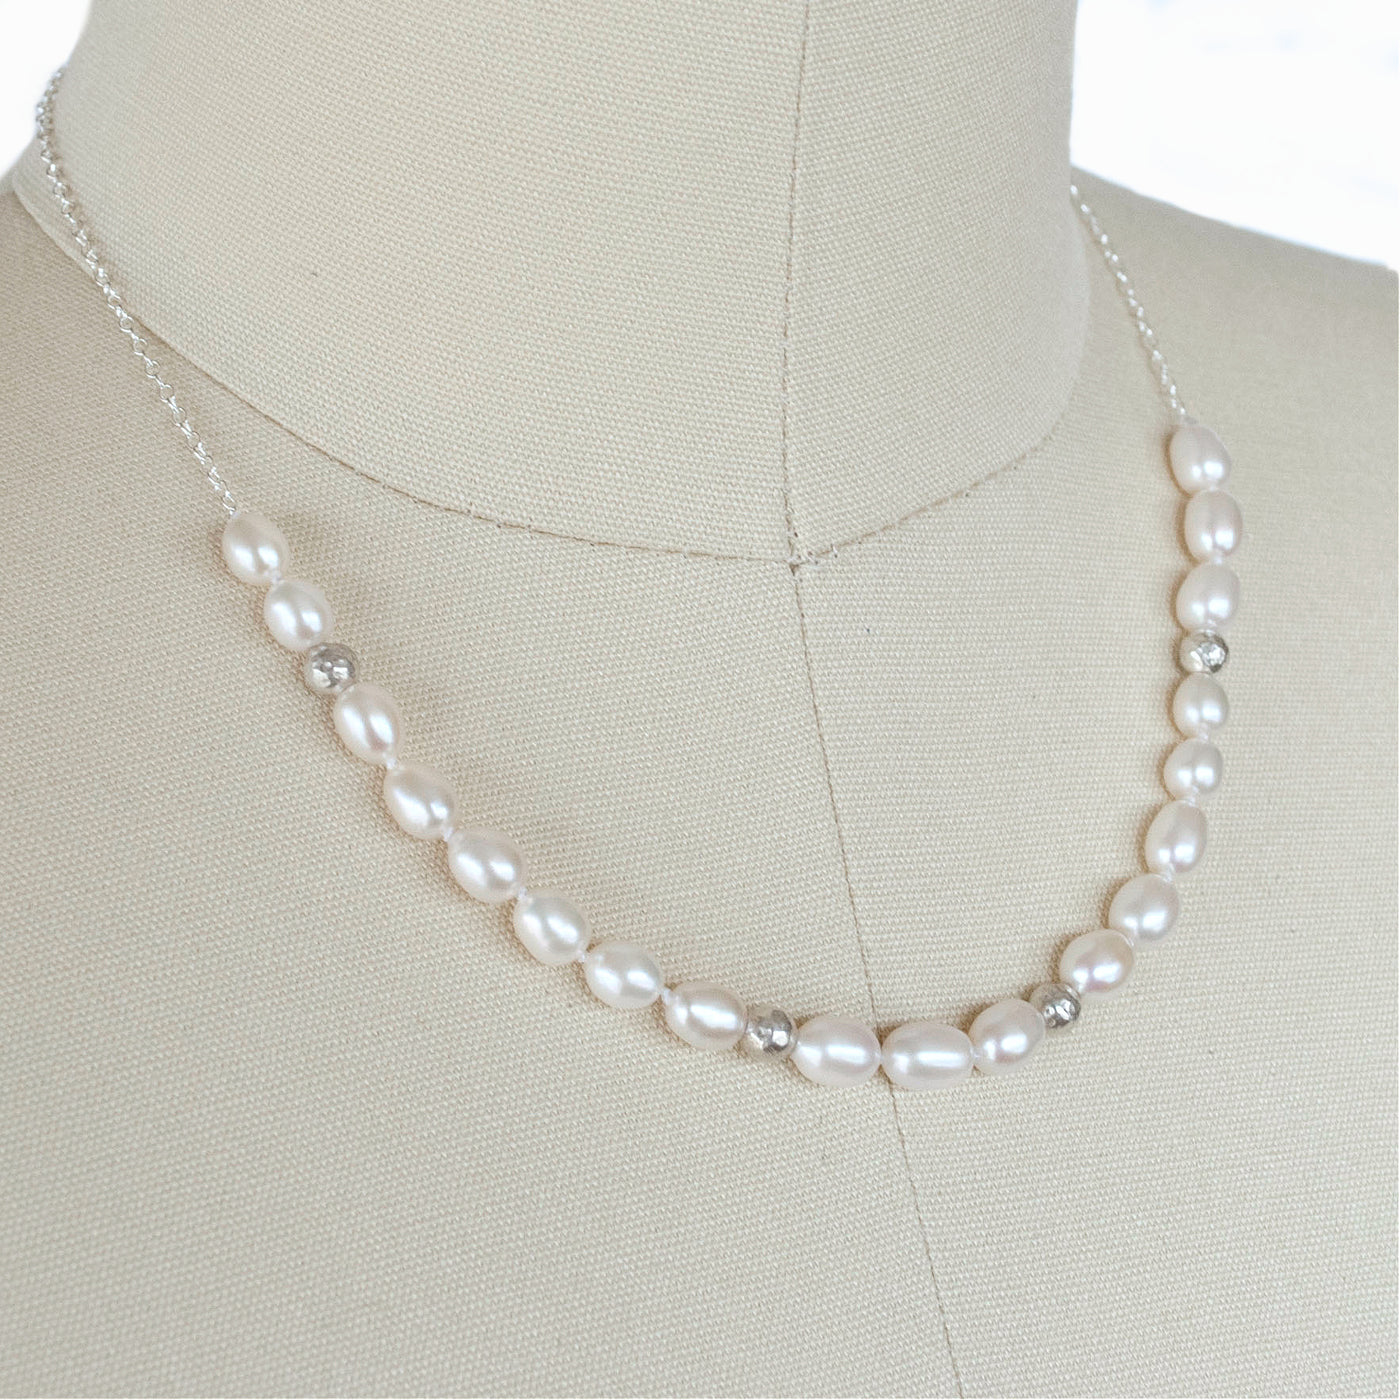 Pearl with Sterling accent beads necklace is shown on a dress from.